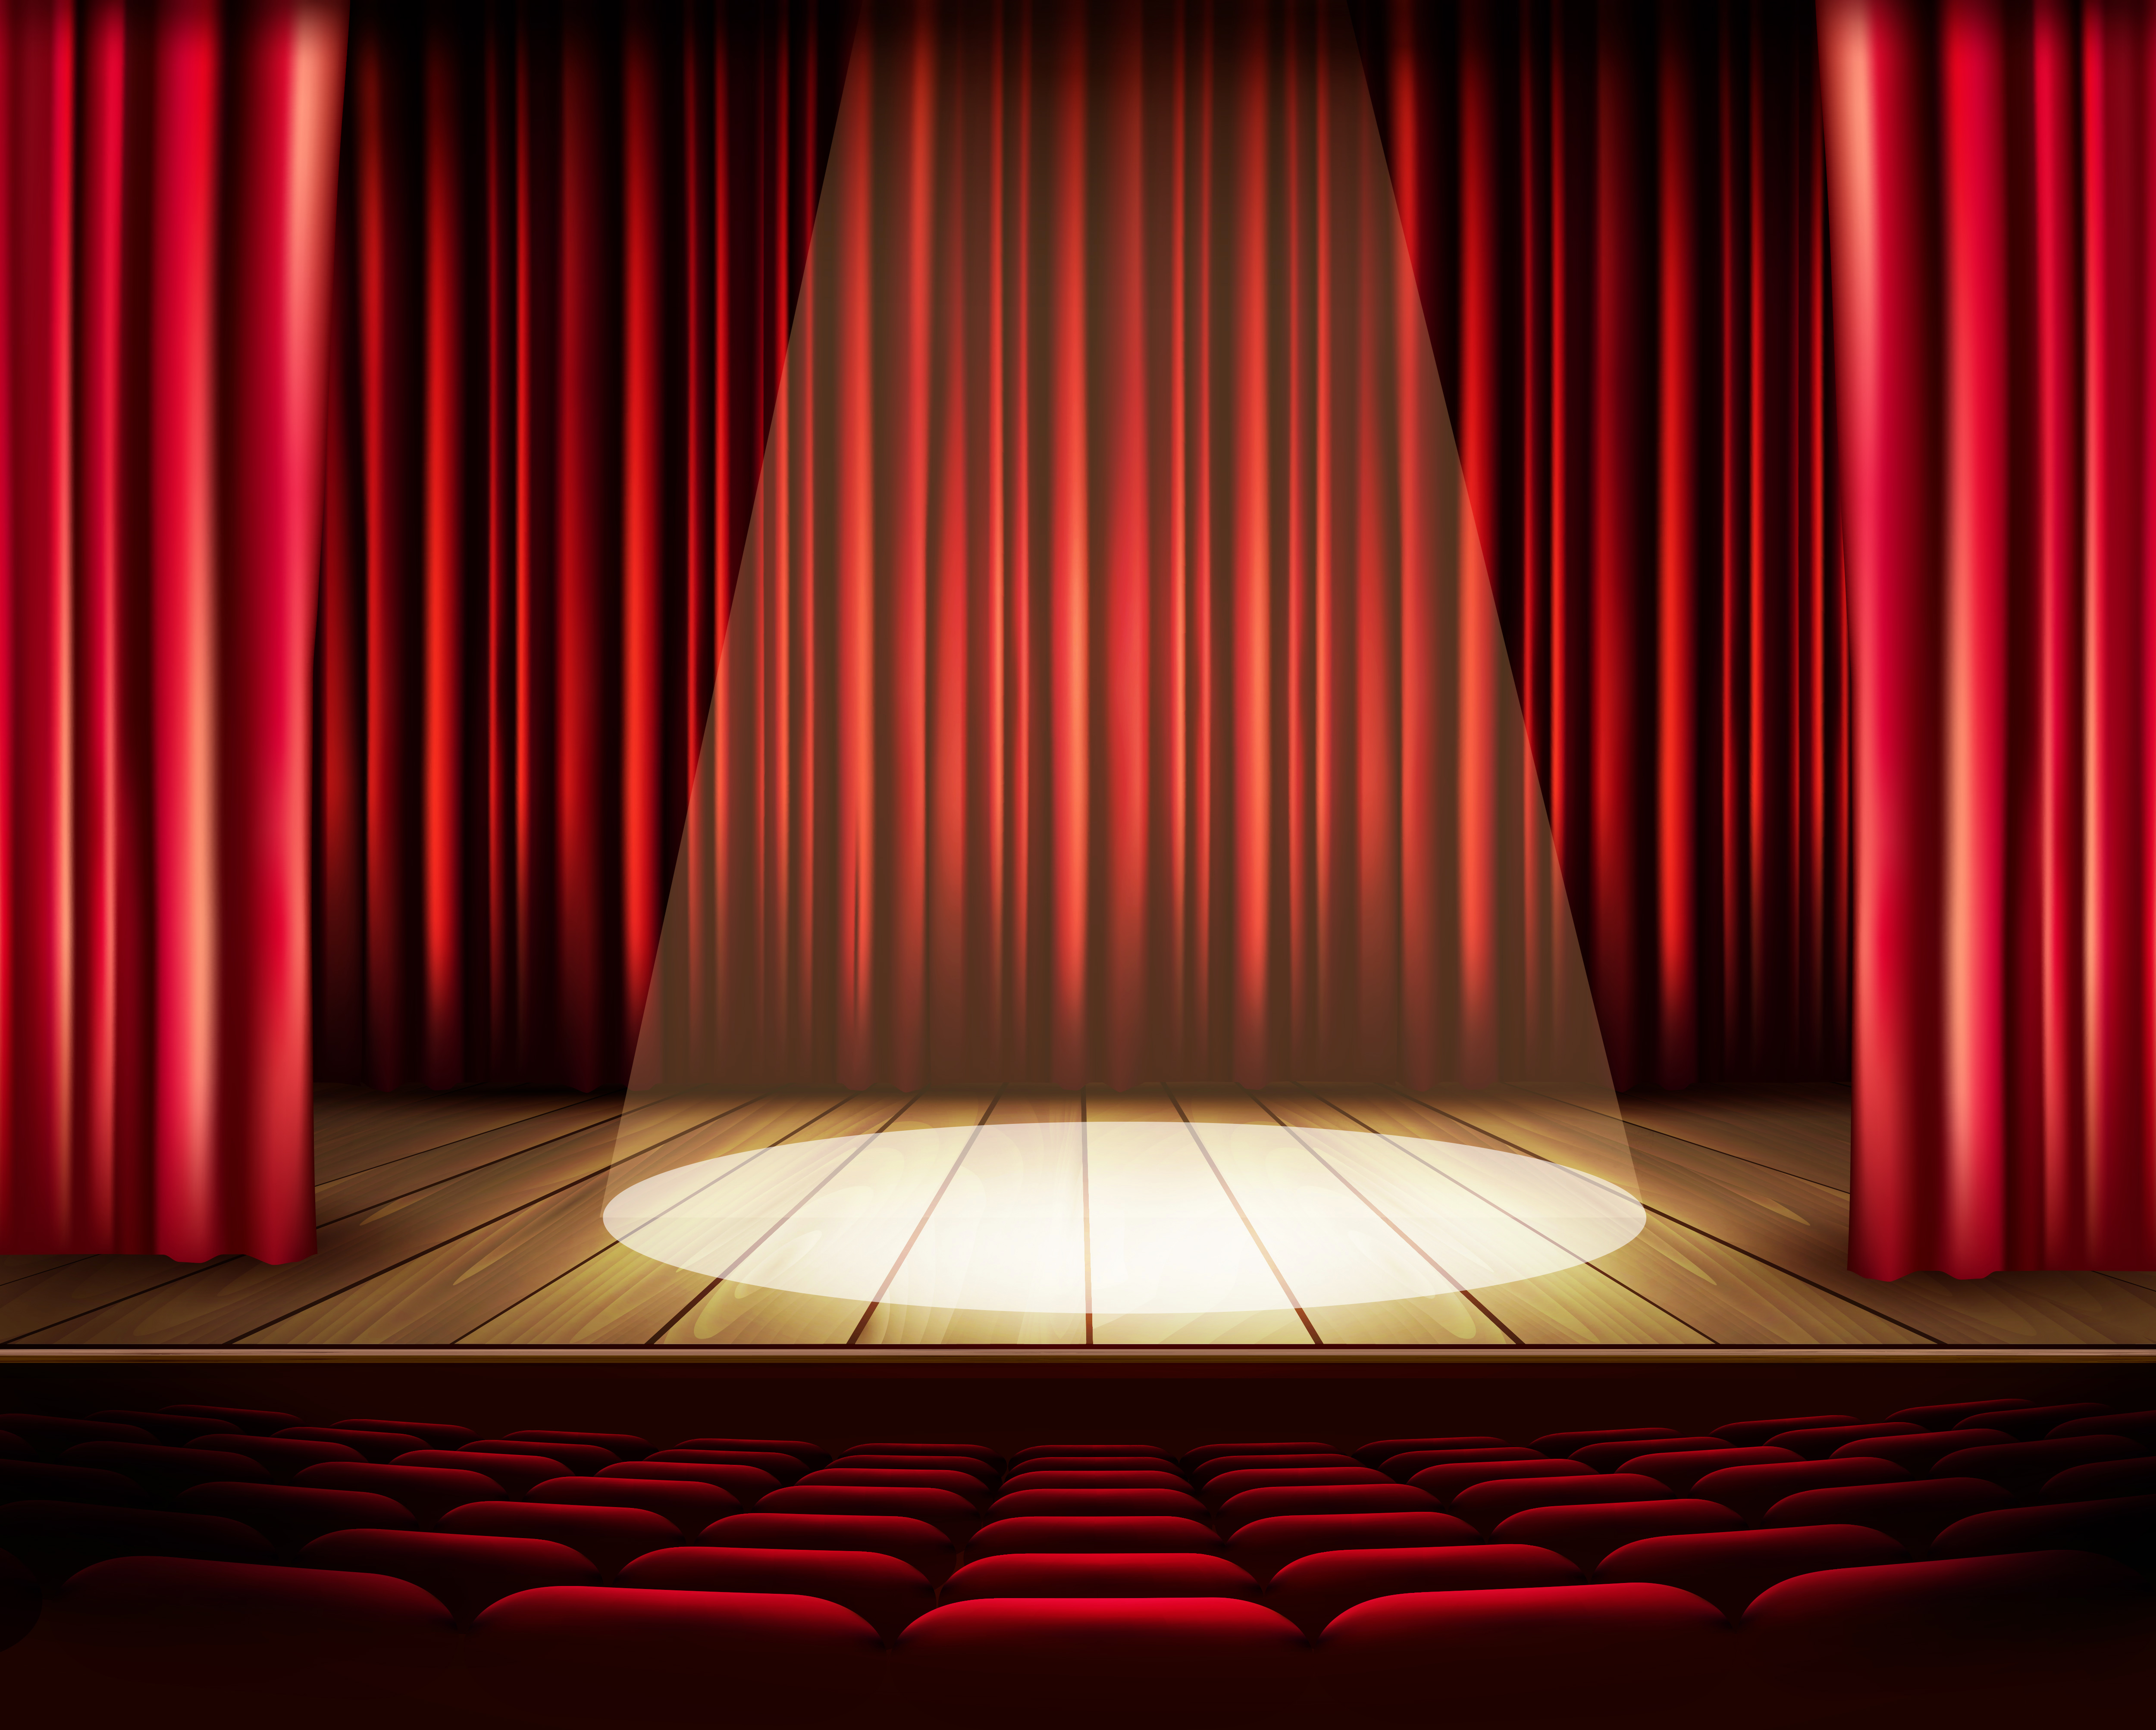 Stage Screen Images  Free Download on Freepik